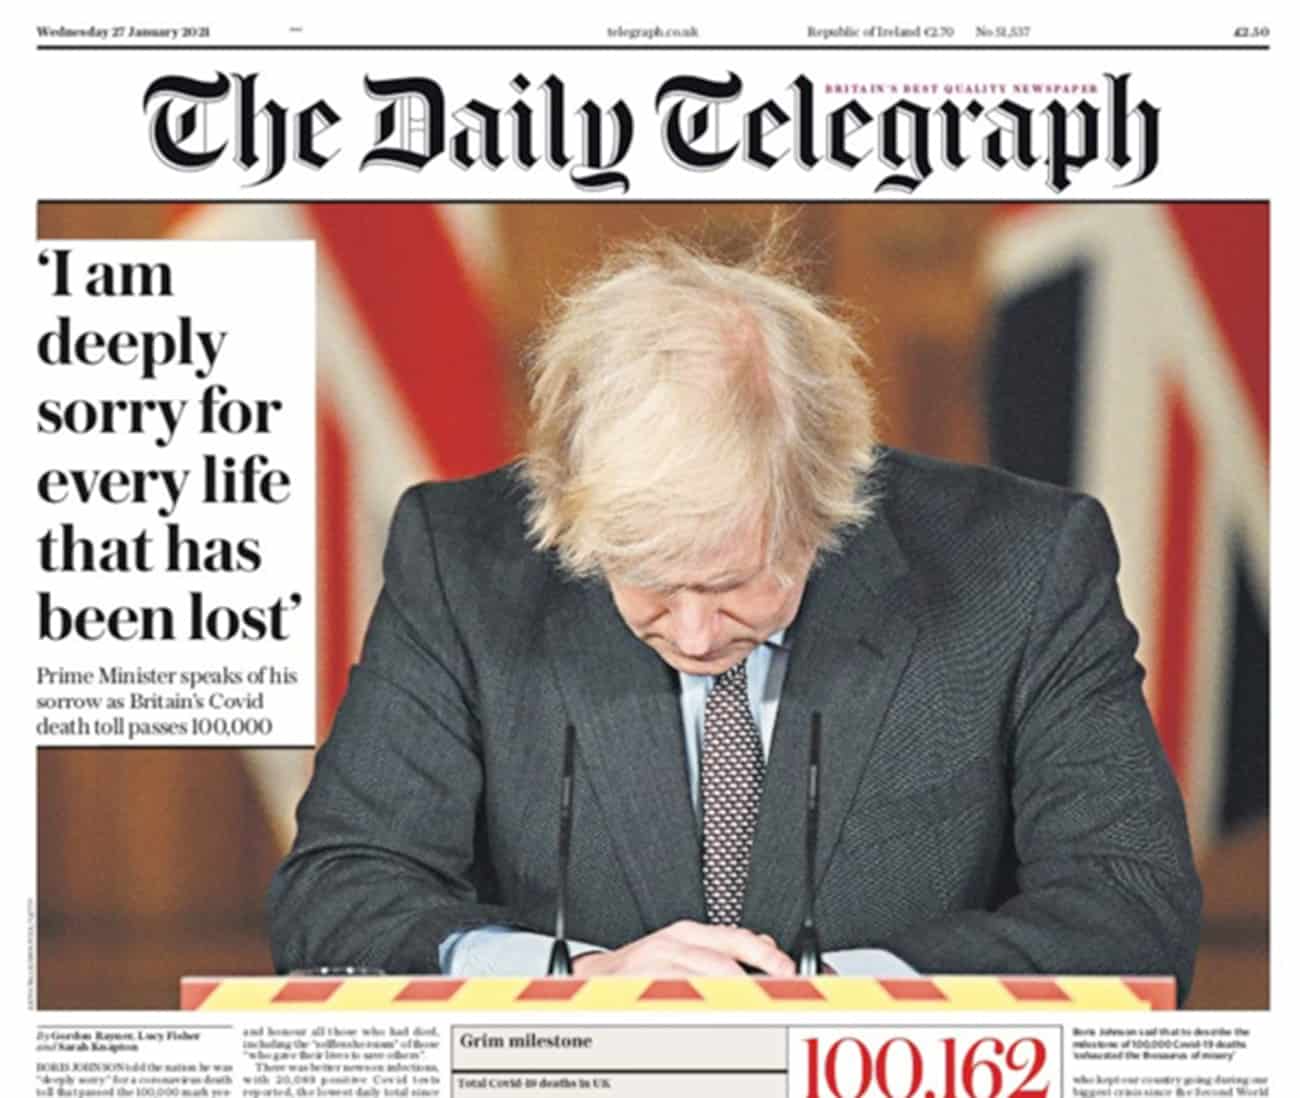 Newspapers react to UK’s darkest day as PM says he is “deeply sorry”